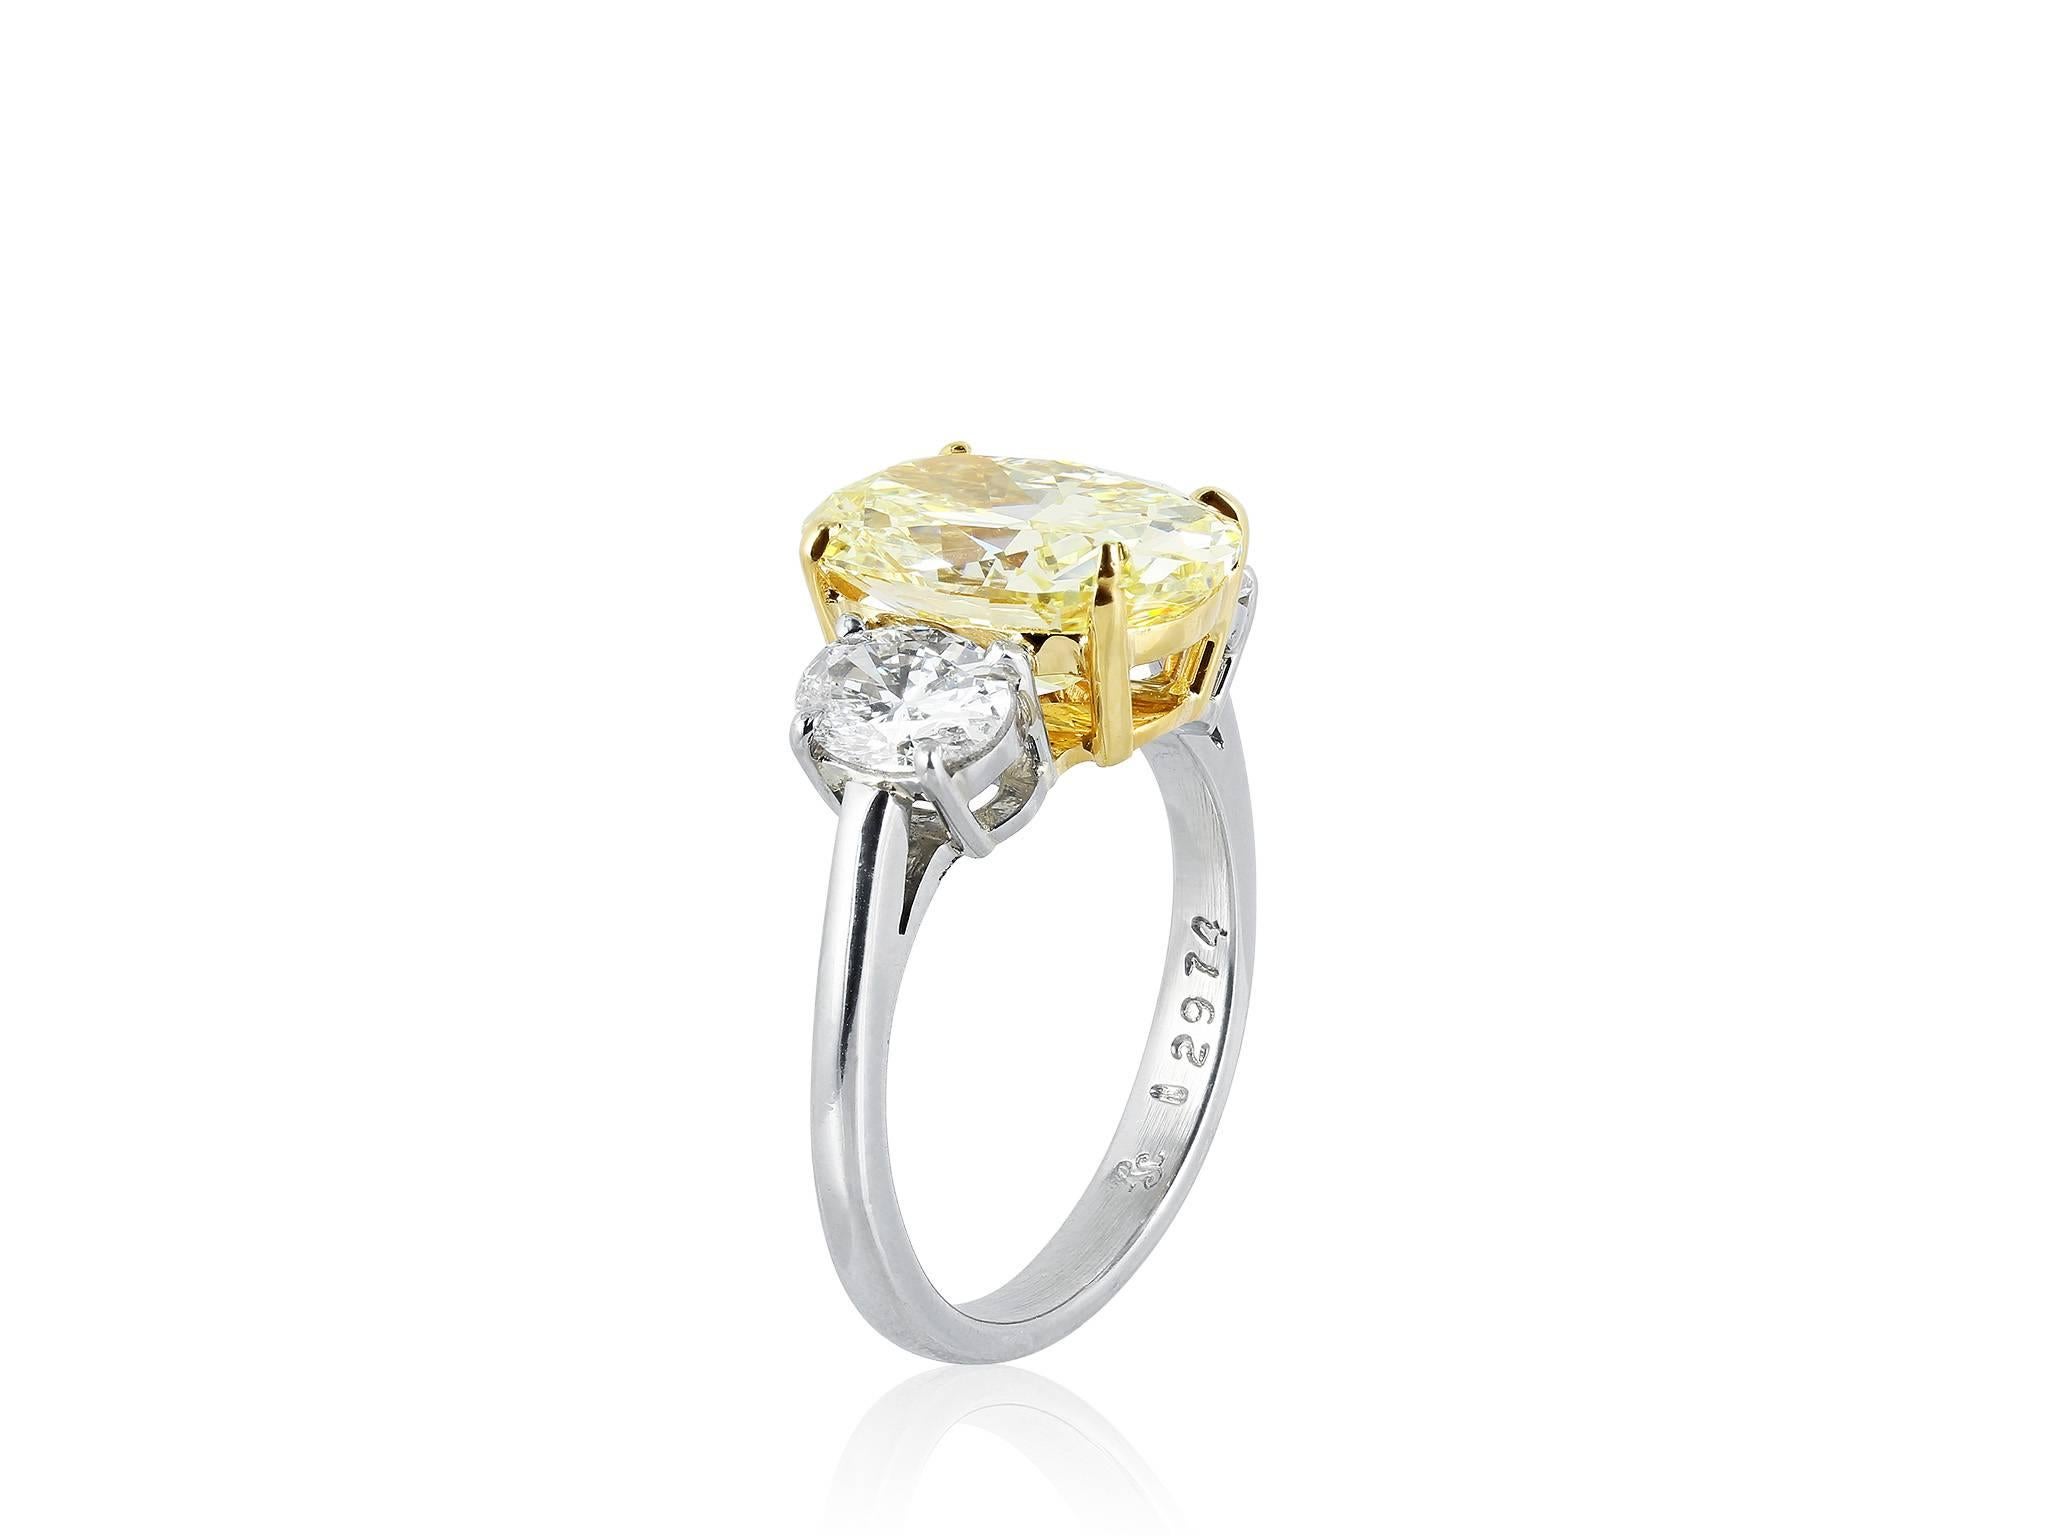 Platinum and 18 karat yellow gold custom made 3 stone ring consisting of 1 oval brilliant natural fancy yellow diamond weighing 4.55 carats having a color and clarity of FY/VS2, measuring 12.97 x 9.10 x 5.83 mm, with GIA certificate #15062114, the